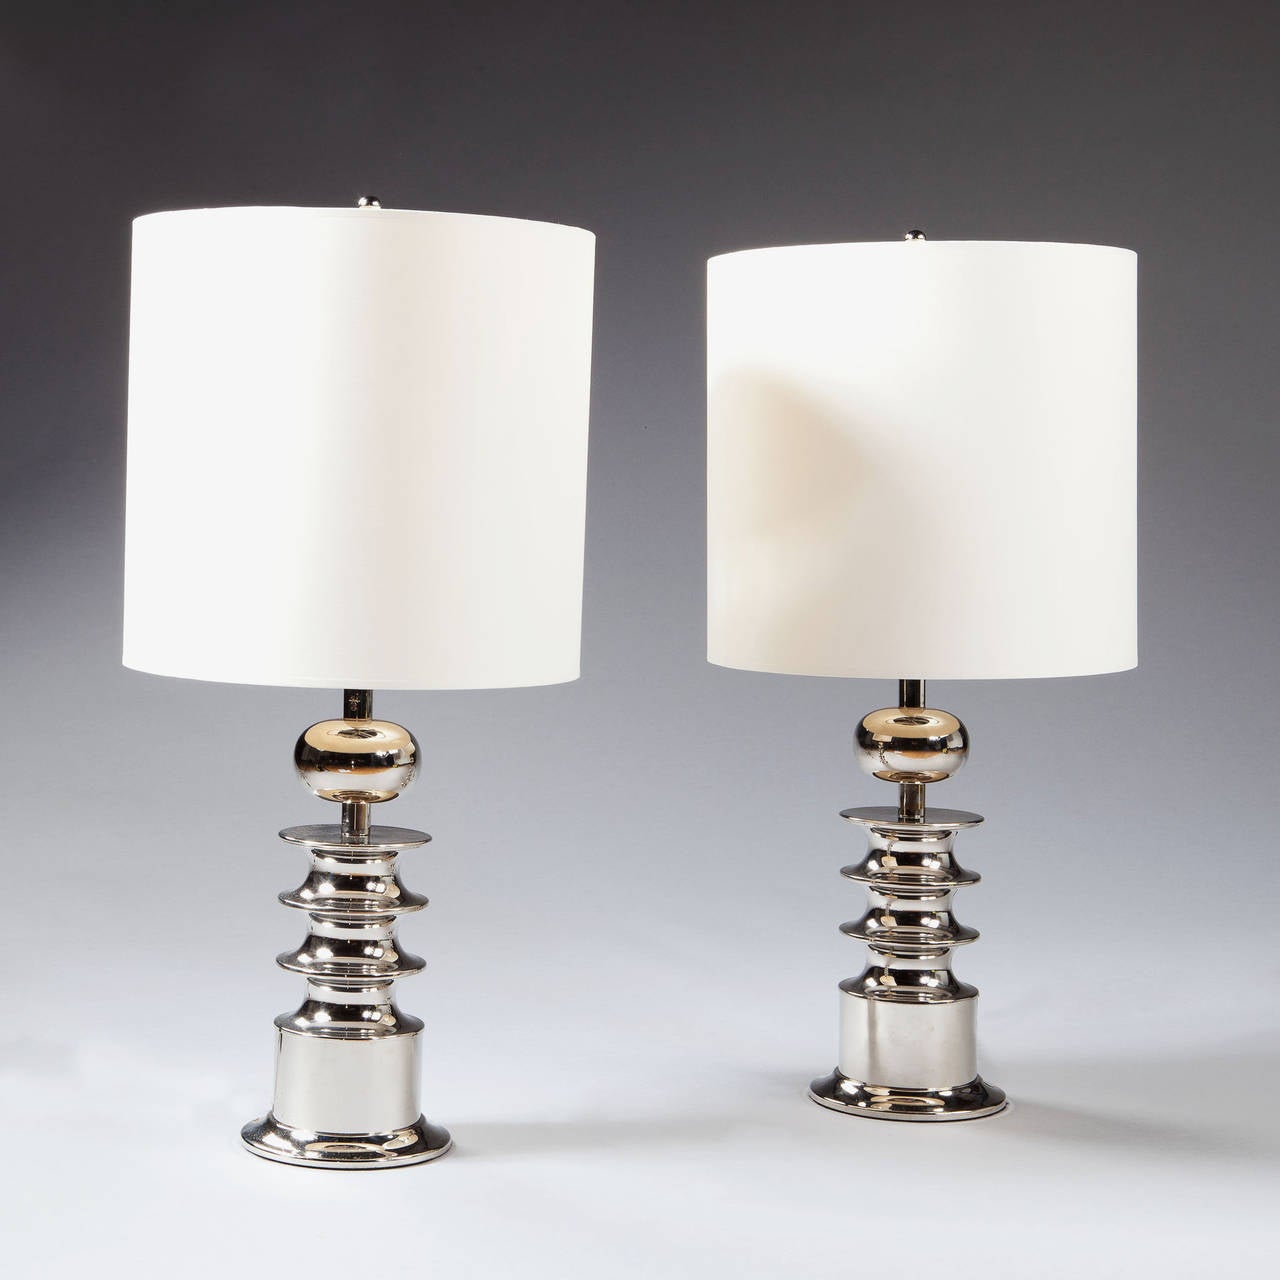 A pair of Mid-Century Italian nickel-plated geometric column lamps.

Possibly by Arredoluce or Sergio Asti, stamped AC and 